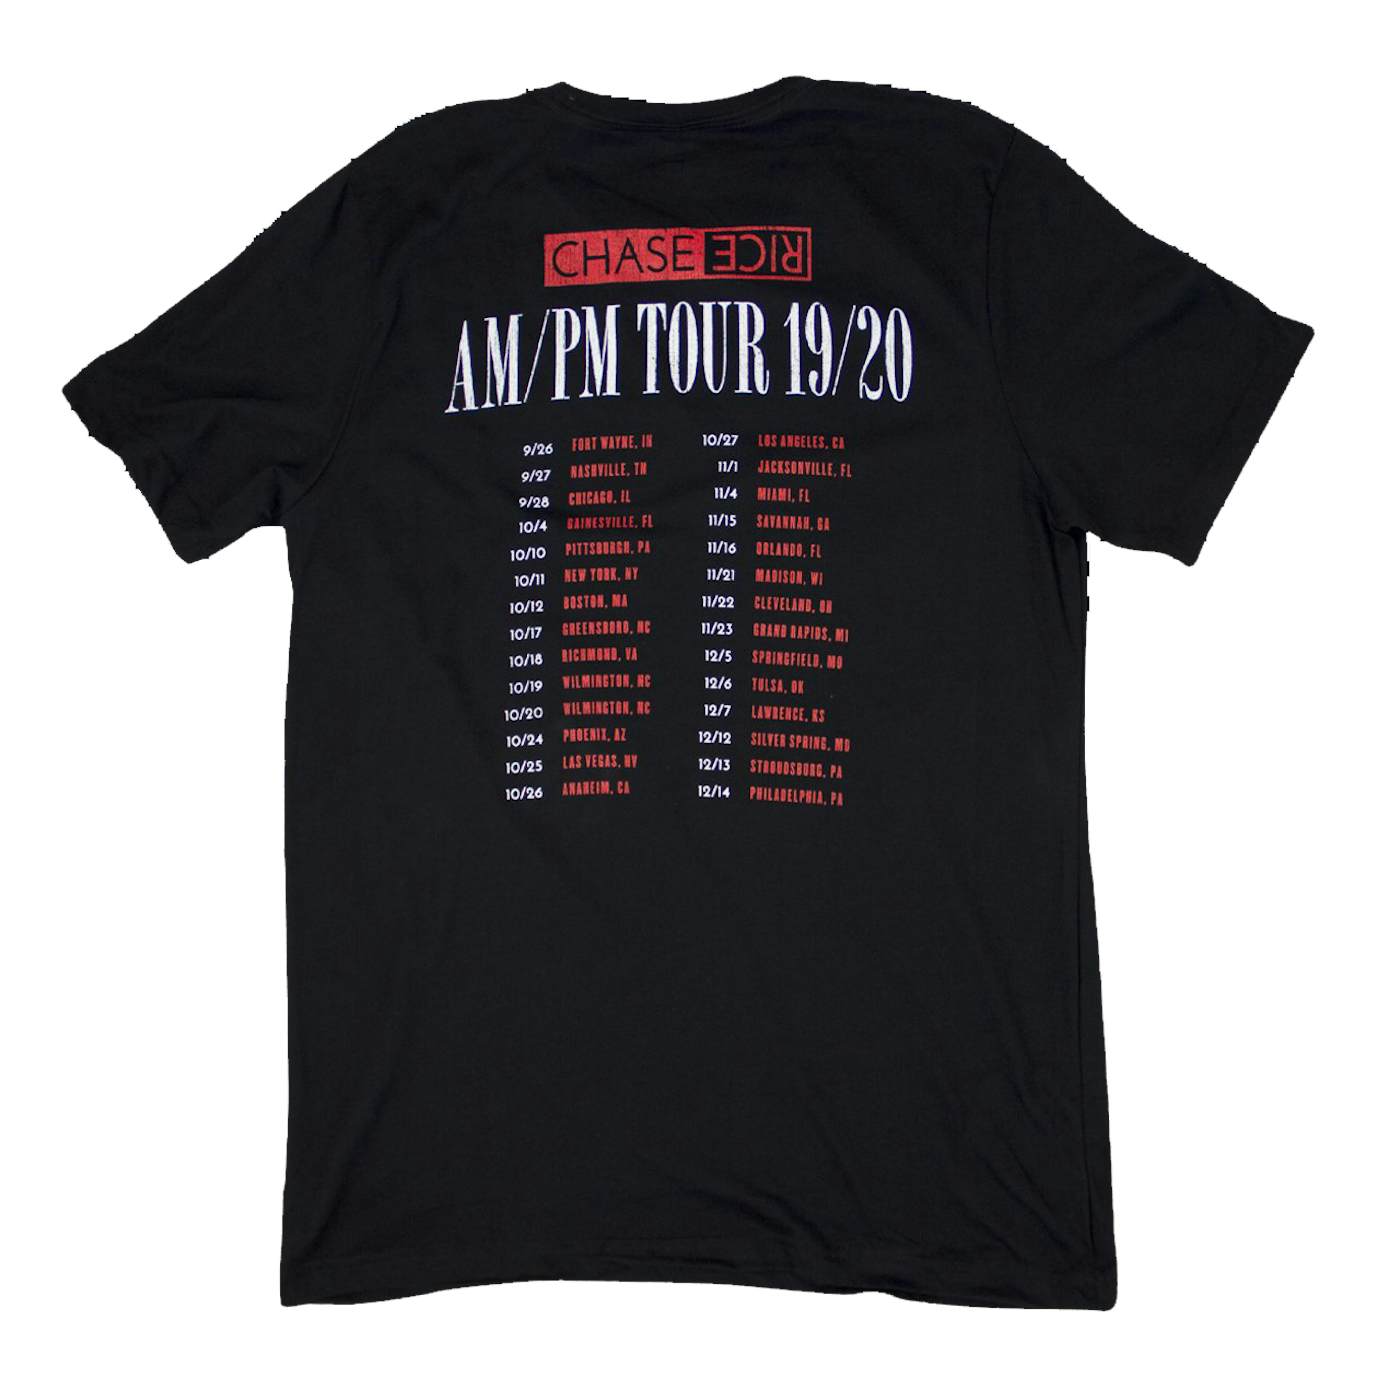 Chase Rice AM/PM Tour Tee 2019/2020